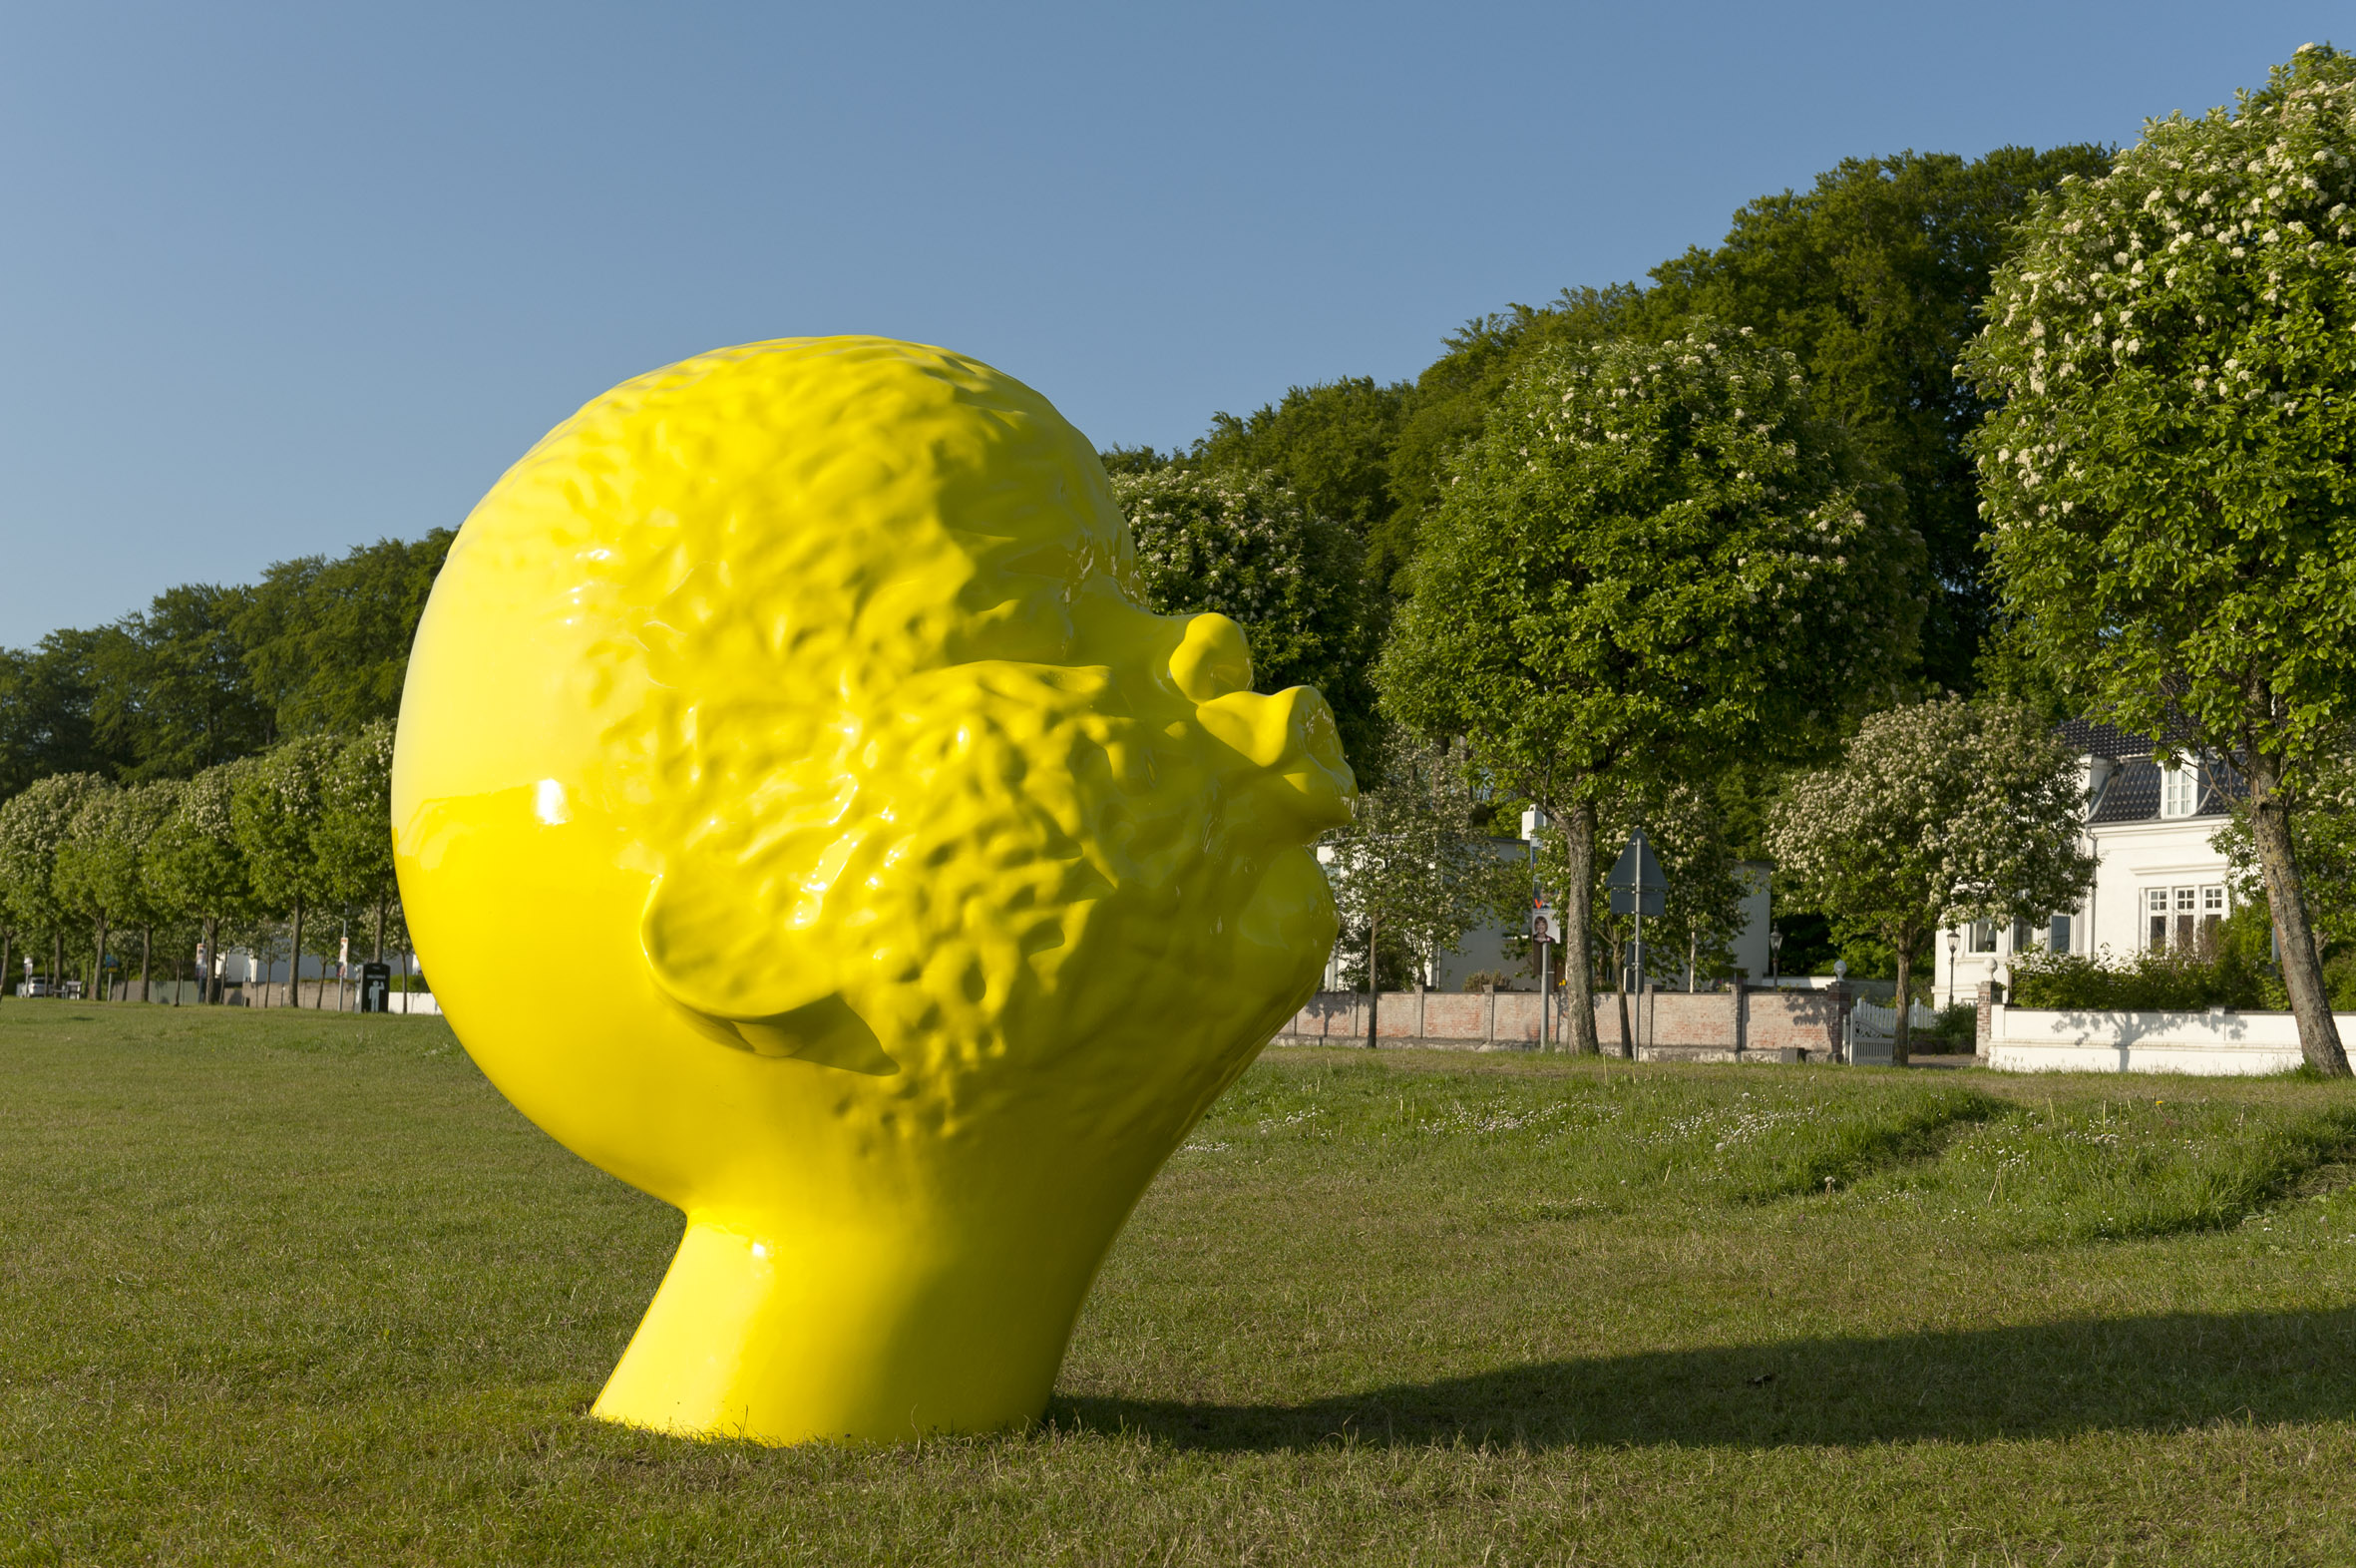 Qian Sihua from China sent us a kiss. See the sculpture by the sea in Århus untill 5 july 2015.